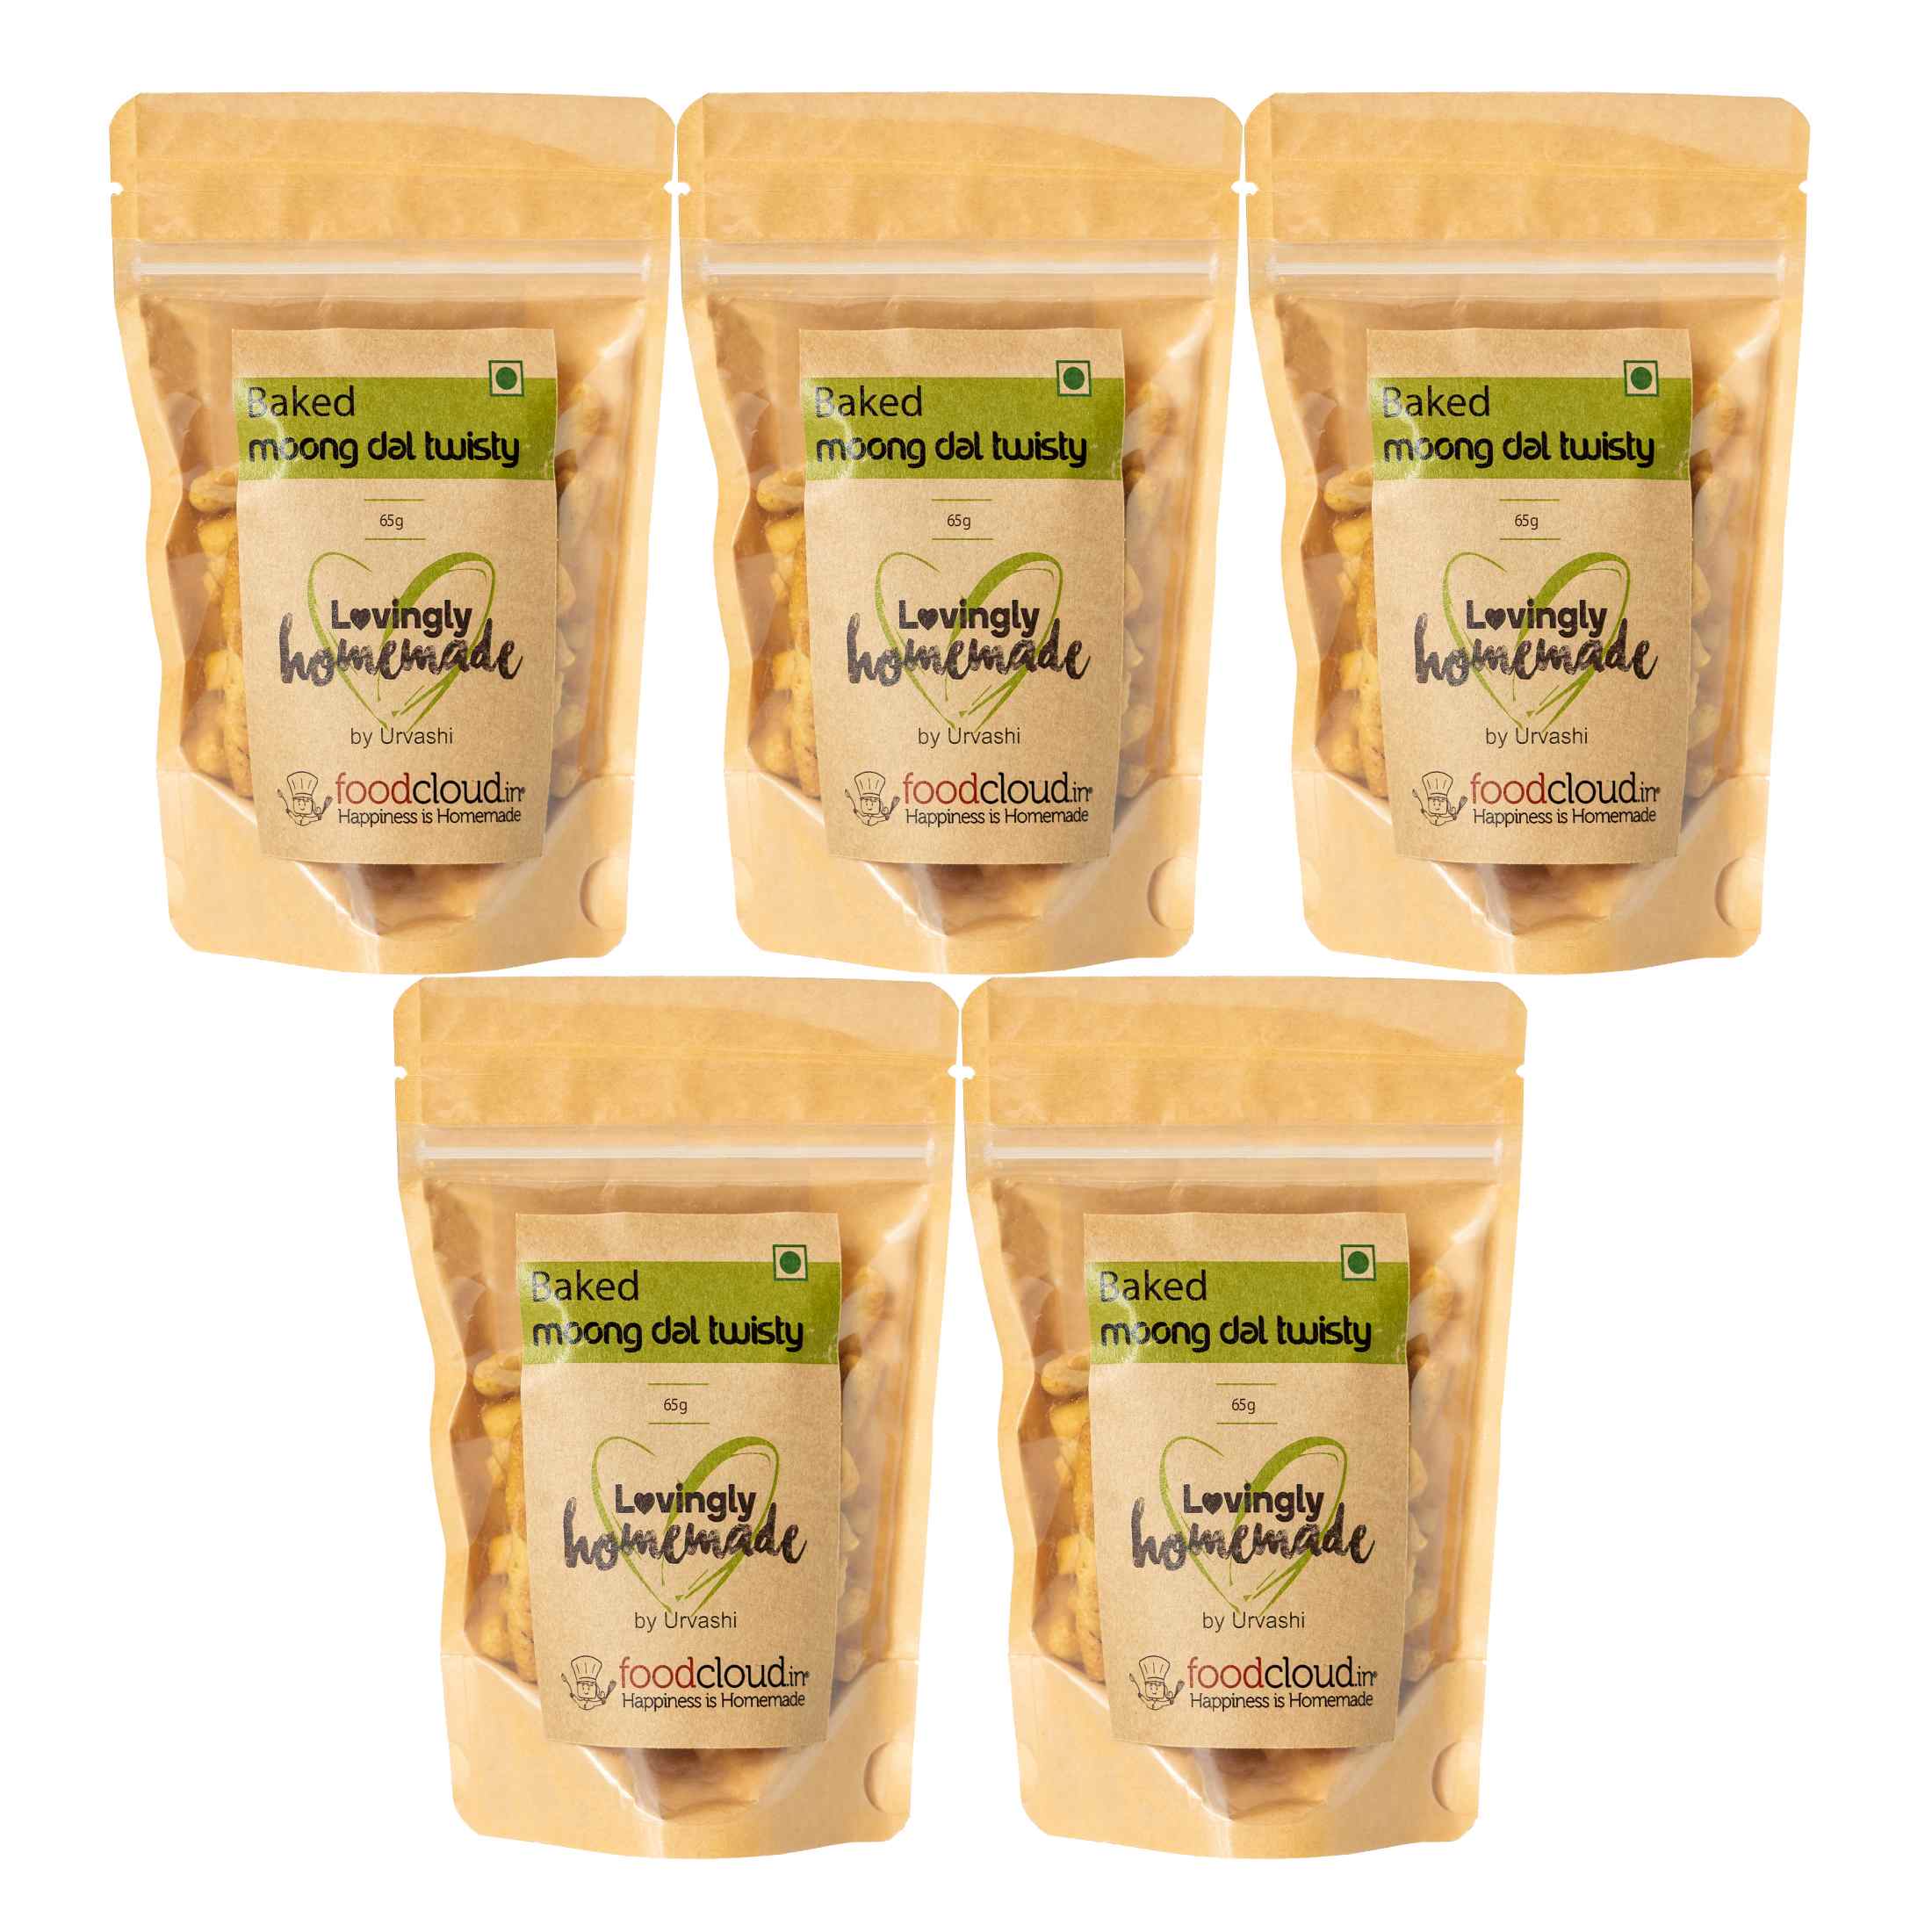 Product: FoodCloud Baked Moong dal Twisty (Pack of 5)